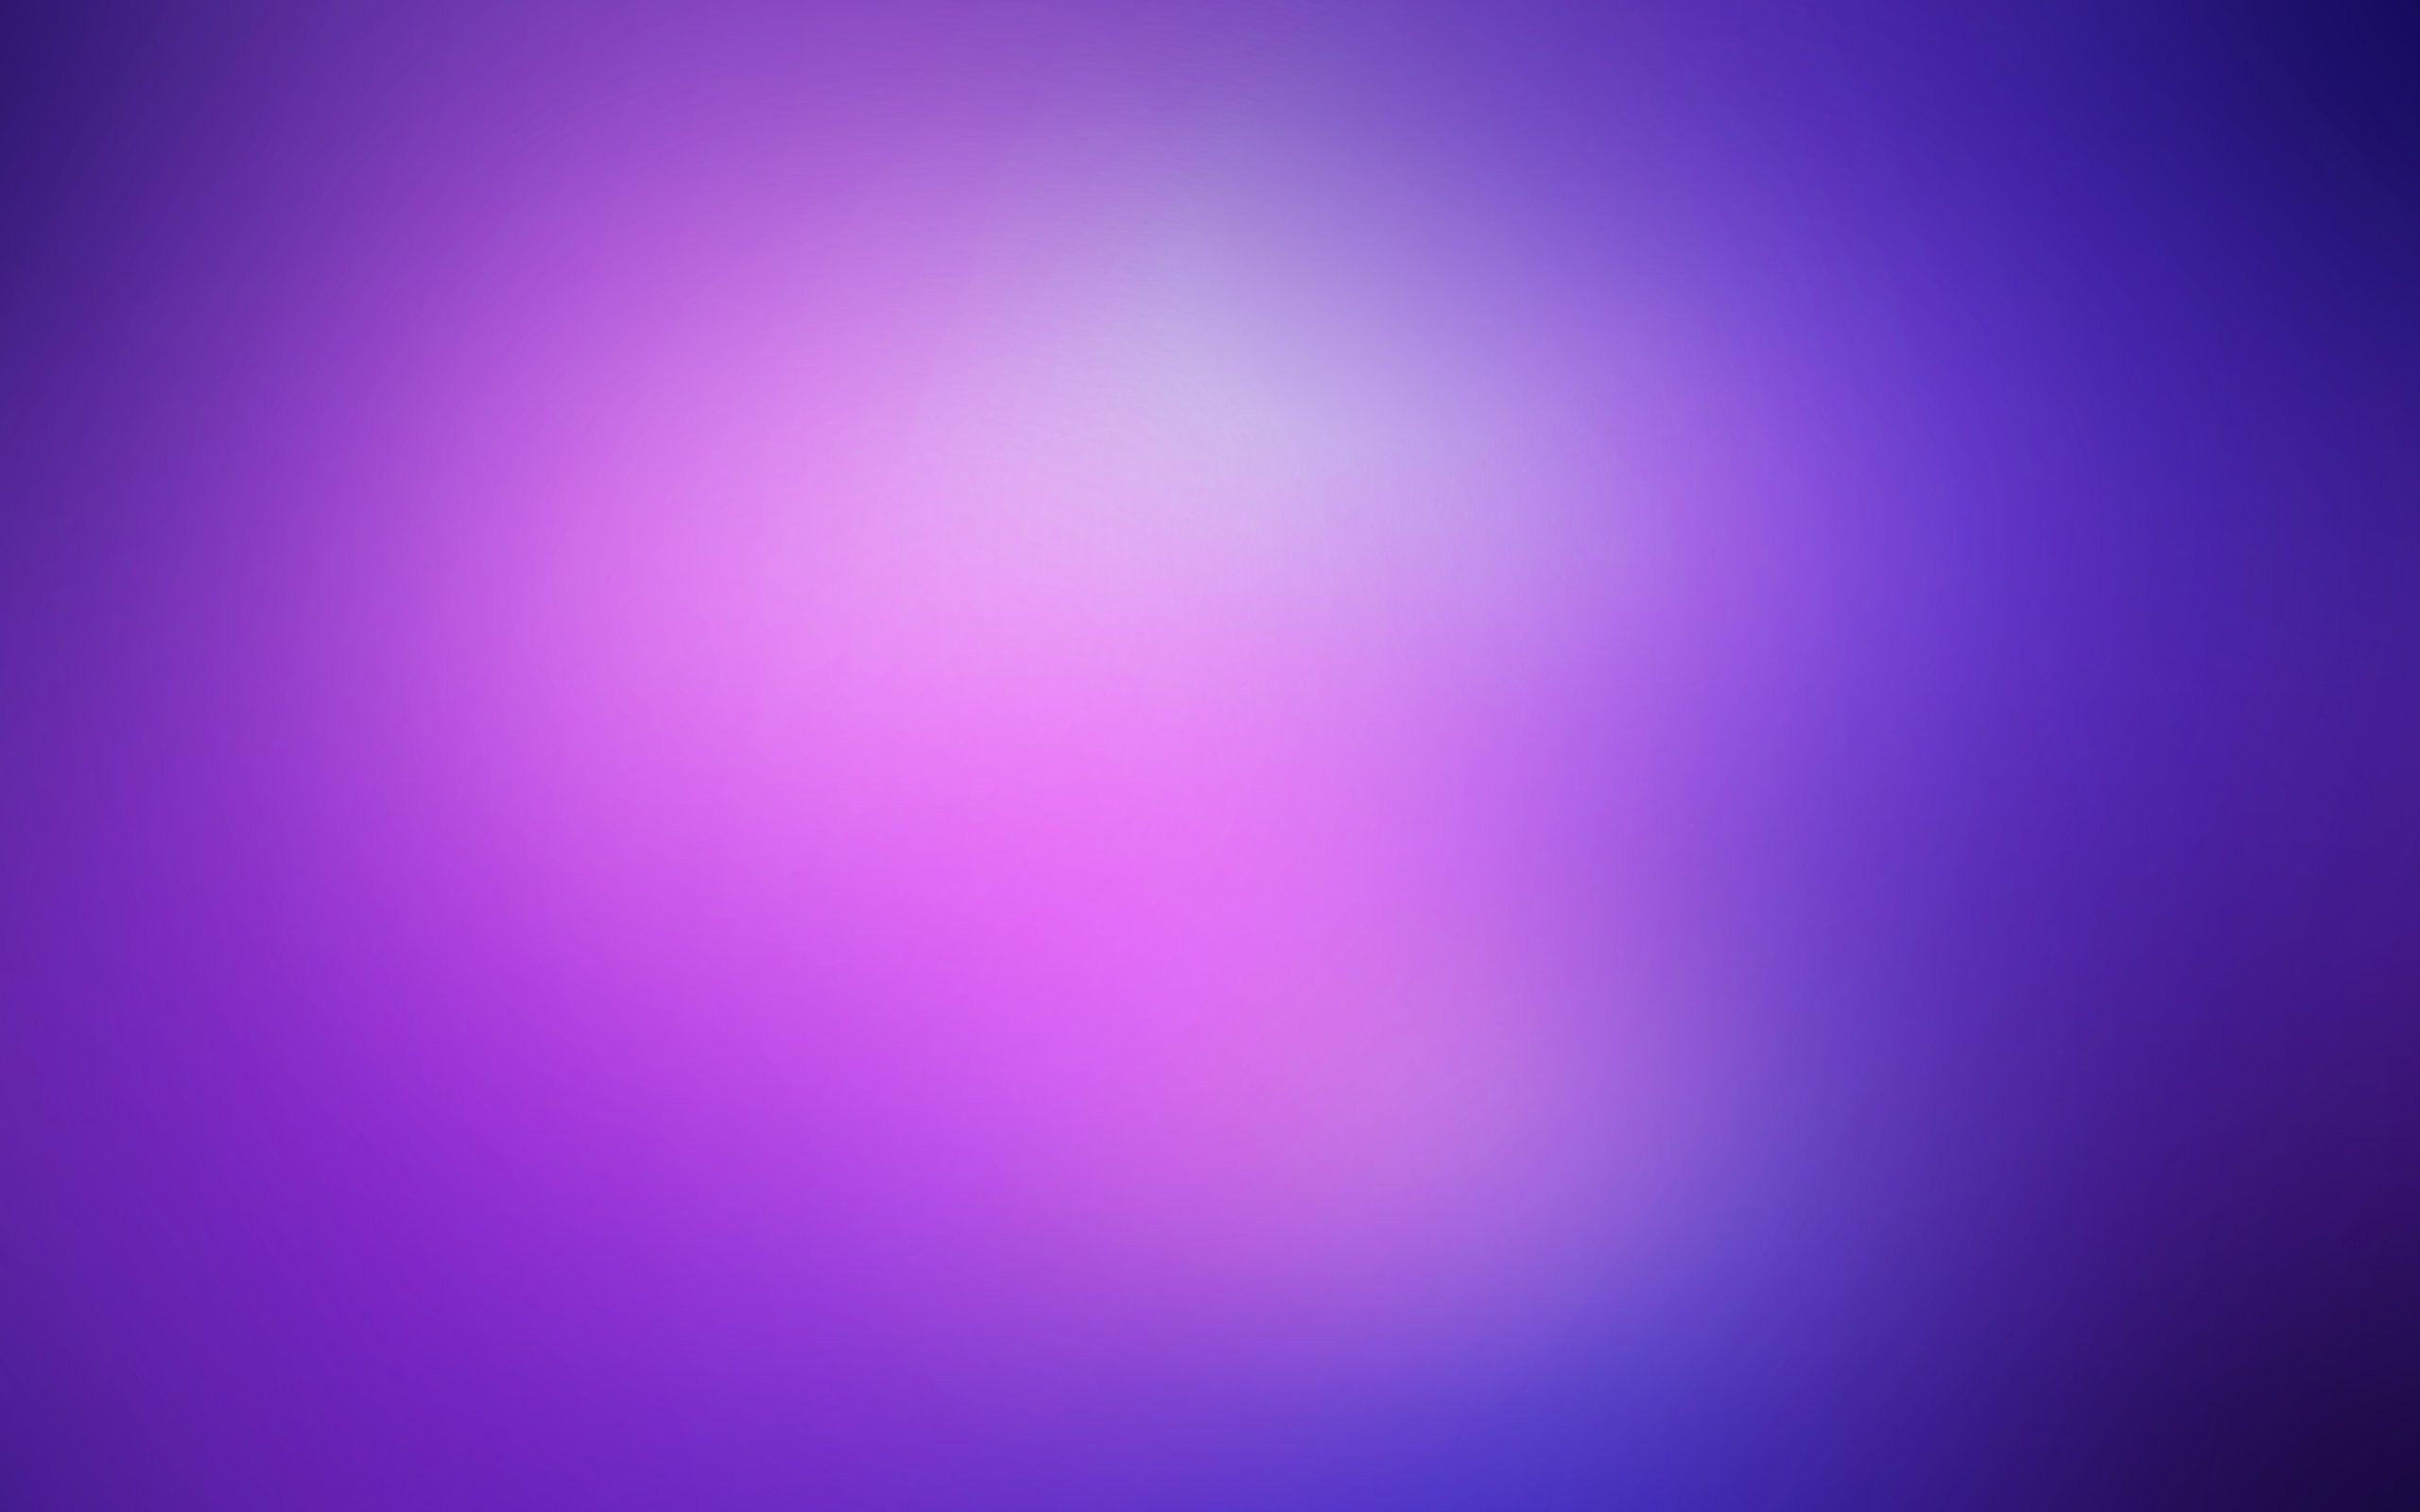 Free download Solid Backgrounds Image [2560x1600] for your Desktop